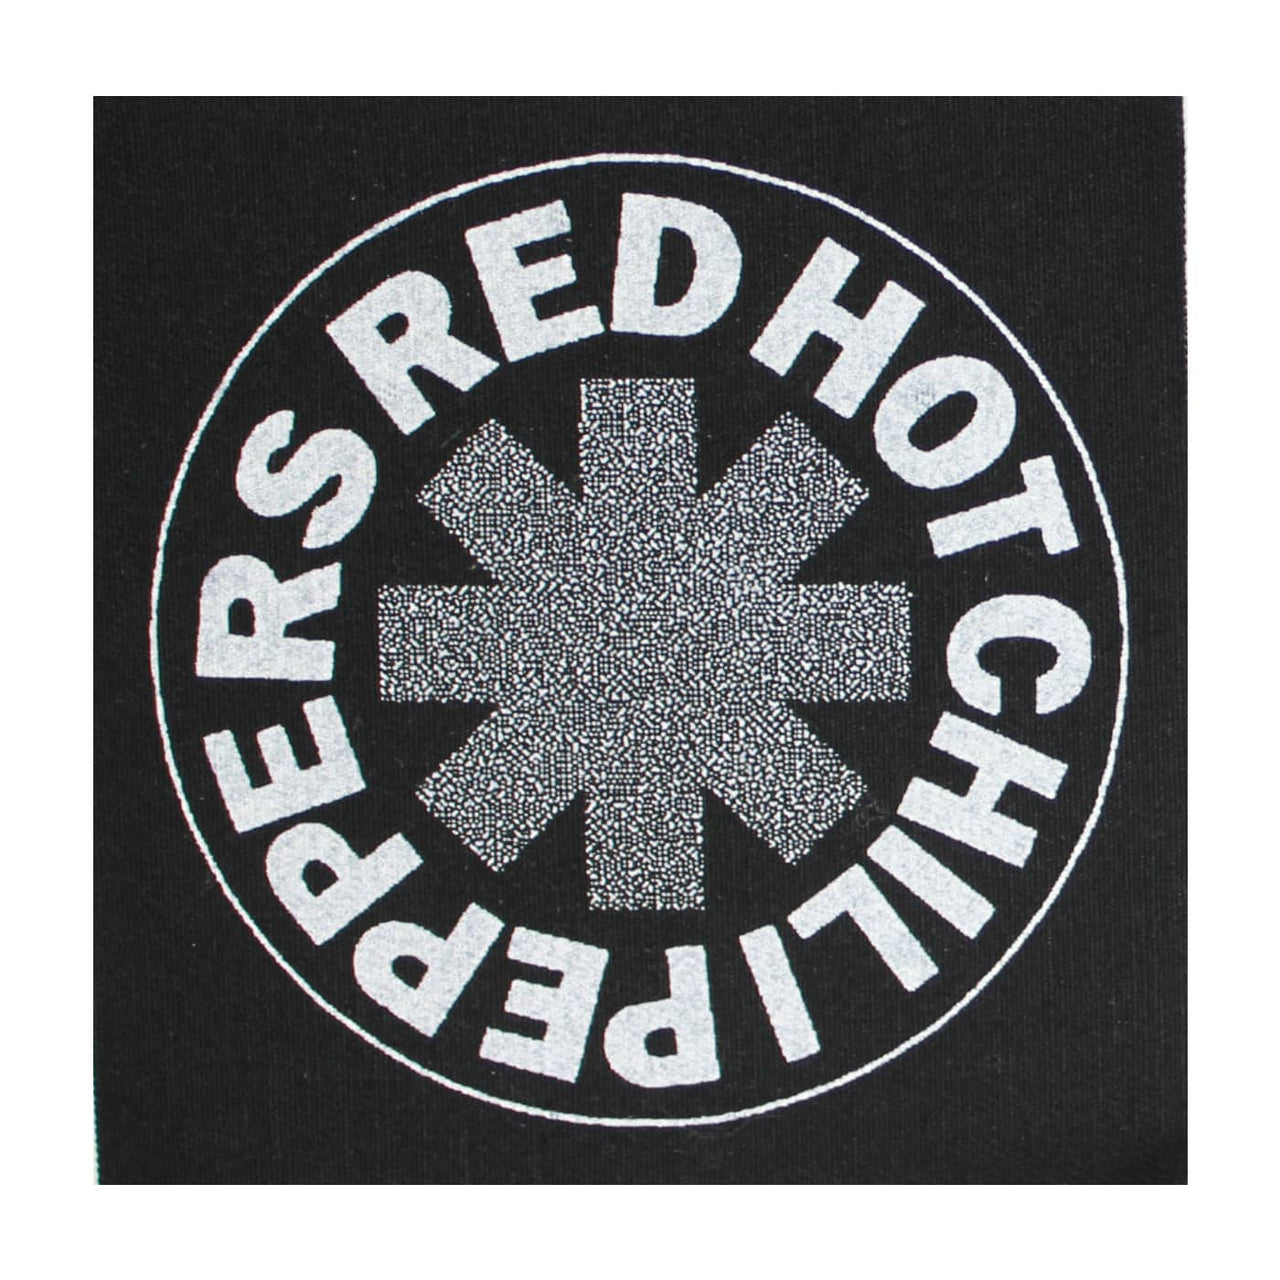 Red Hot Chili Peppers Cloth Patch